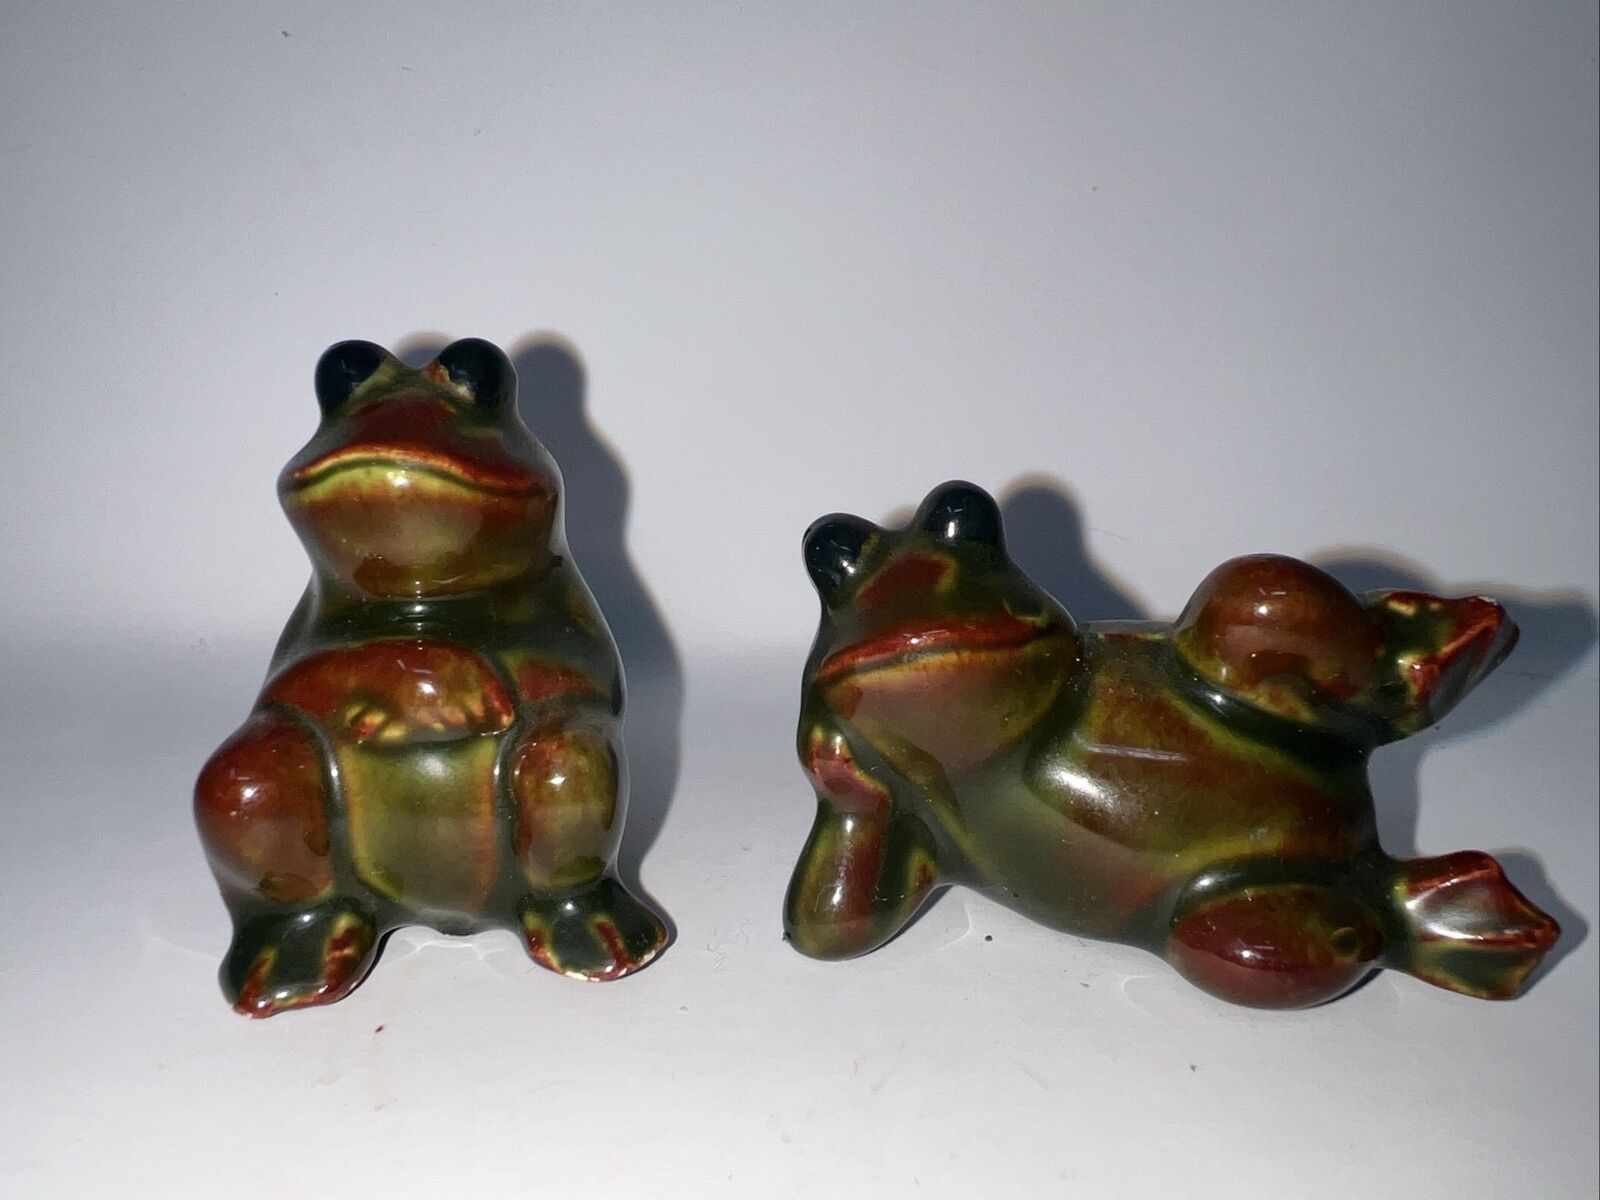 Two Laid-back Frogs For frog collectors Great condition very cute